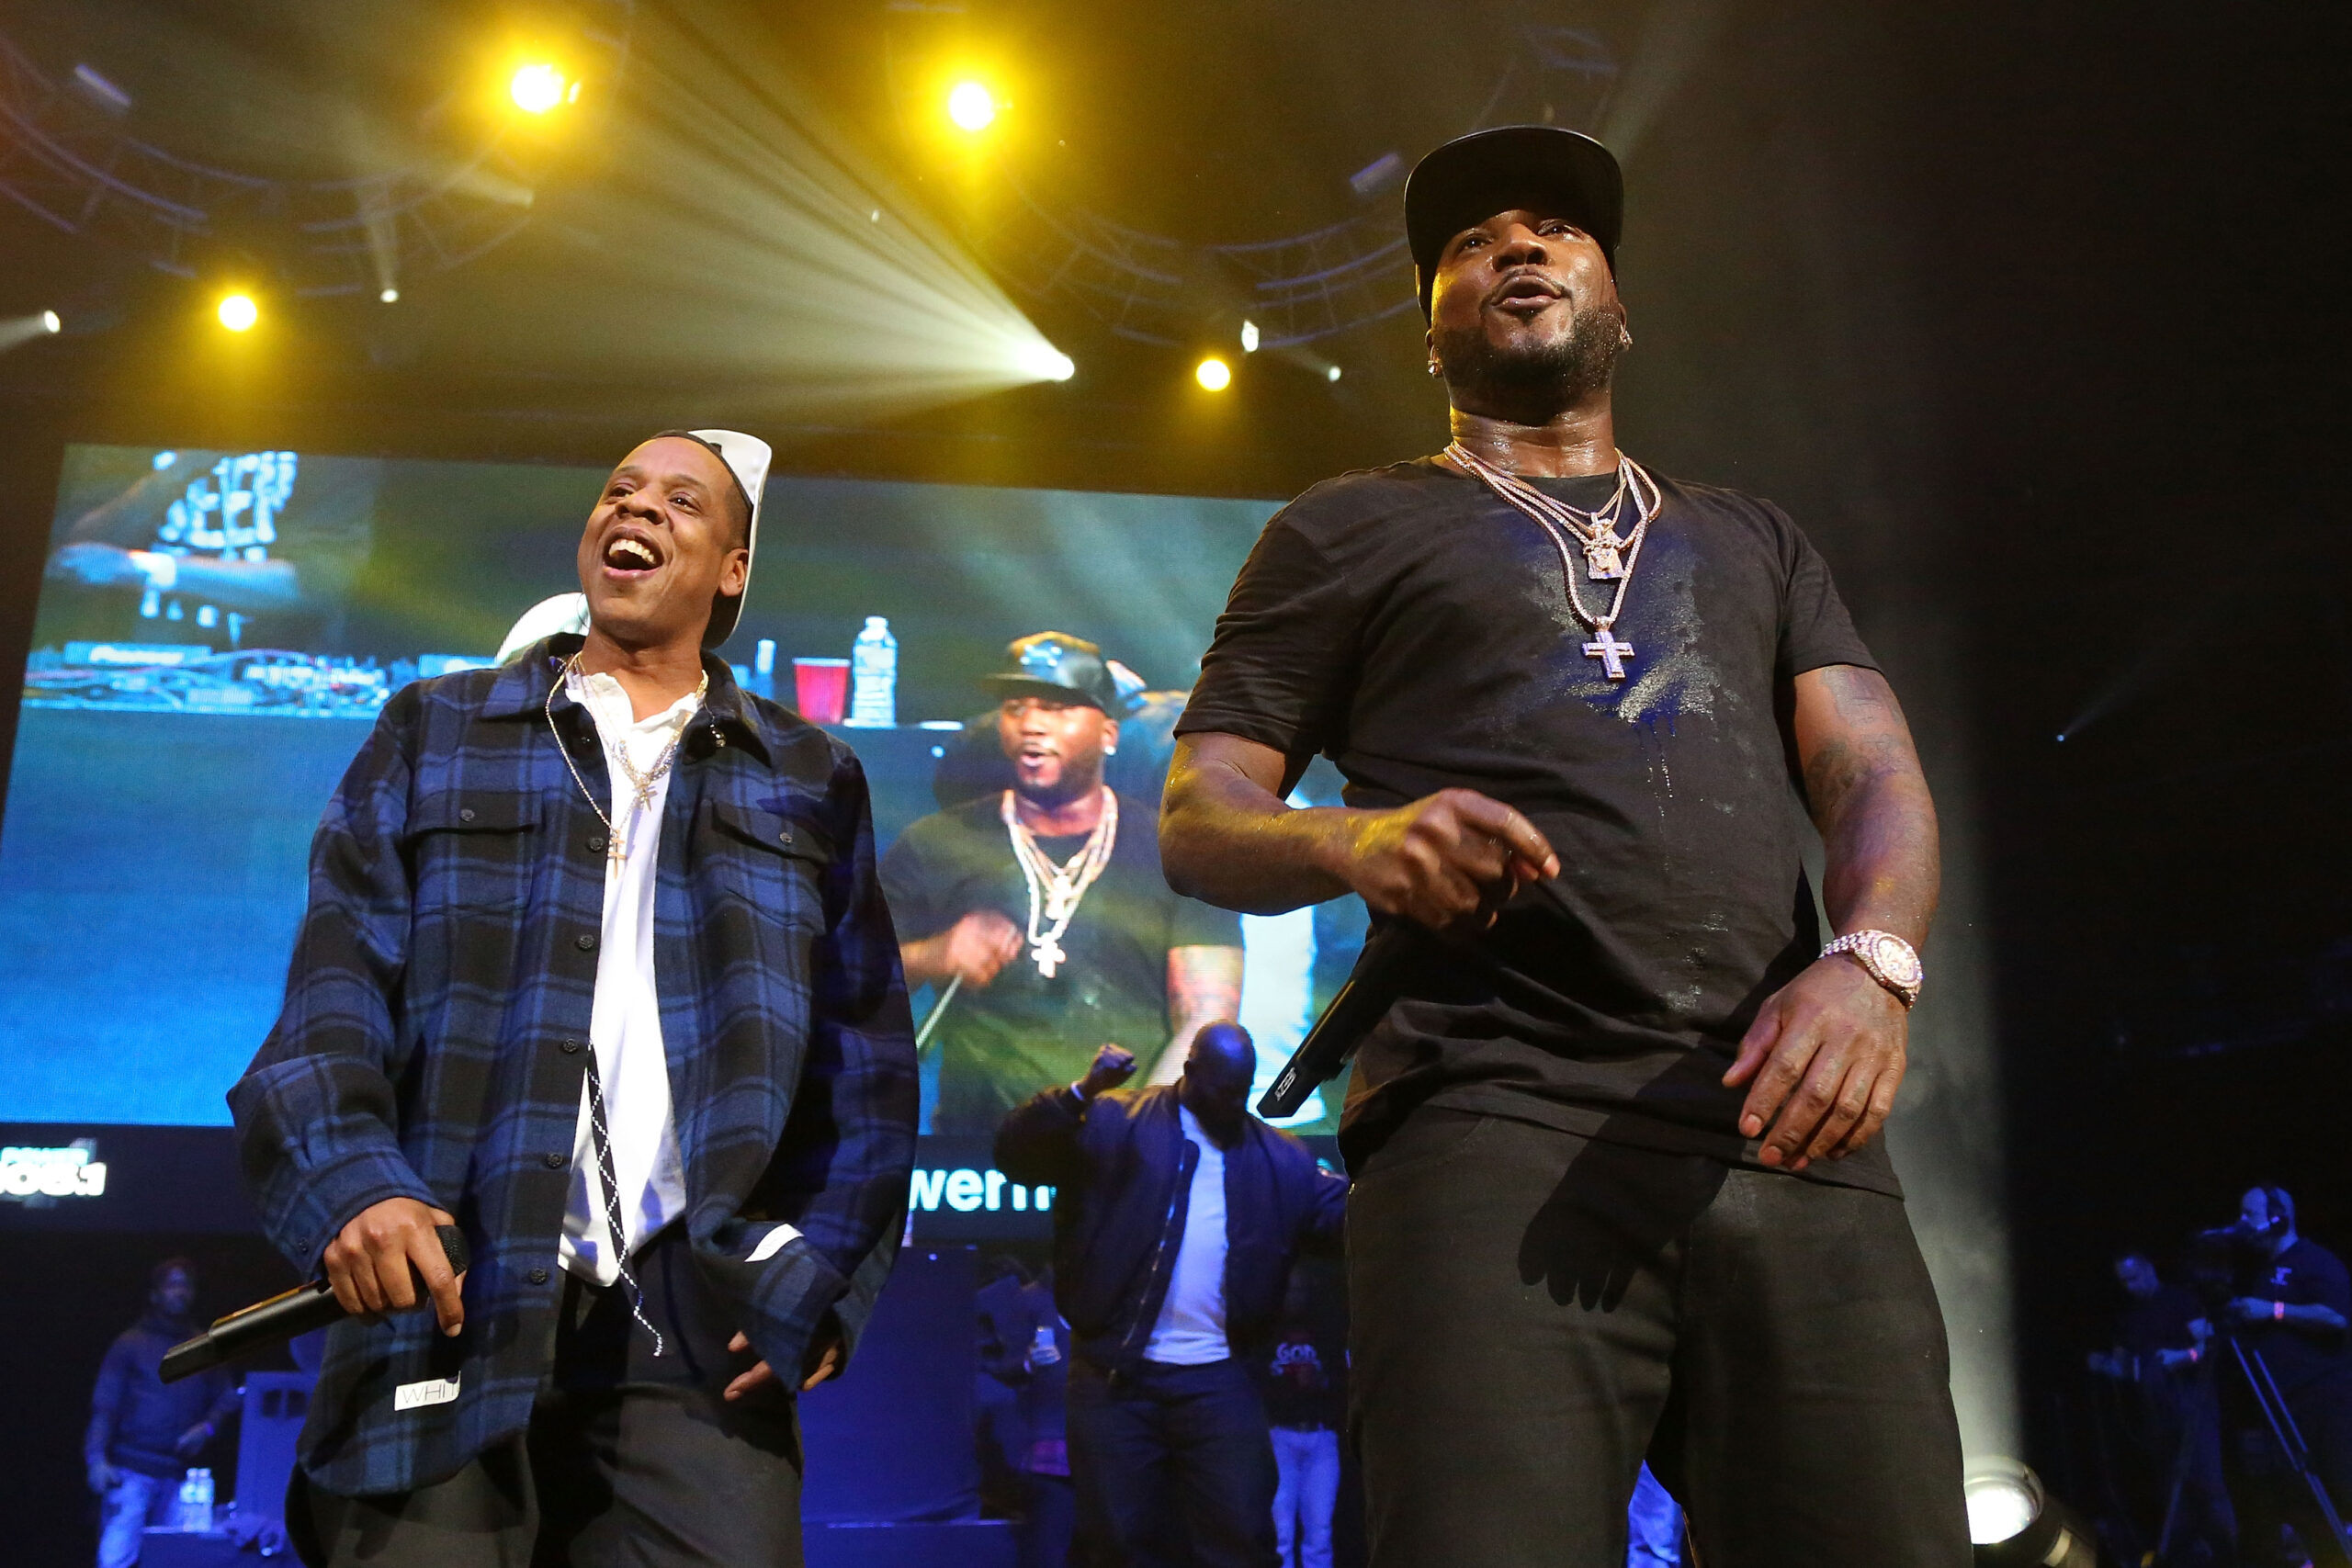 Jeezy Recalls How Jay-Z Hopped On “My President” & Their Wild Live Debut